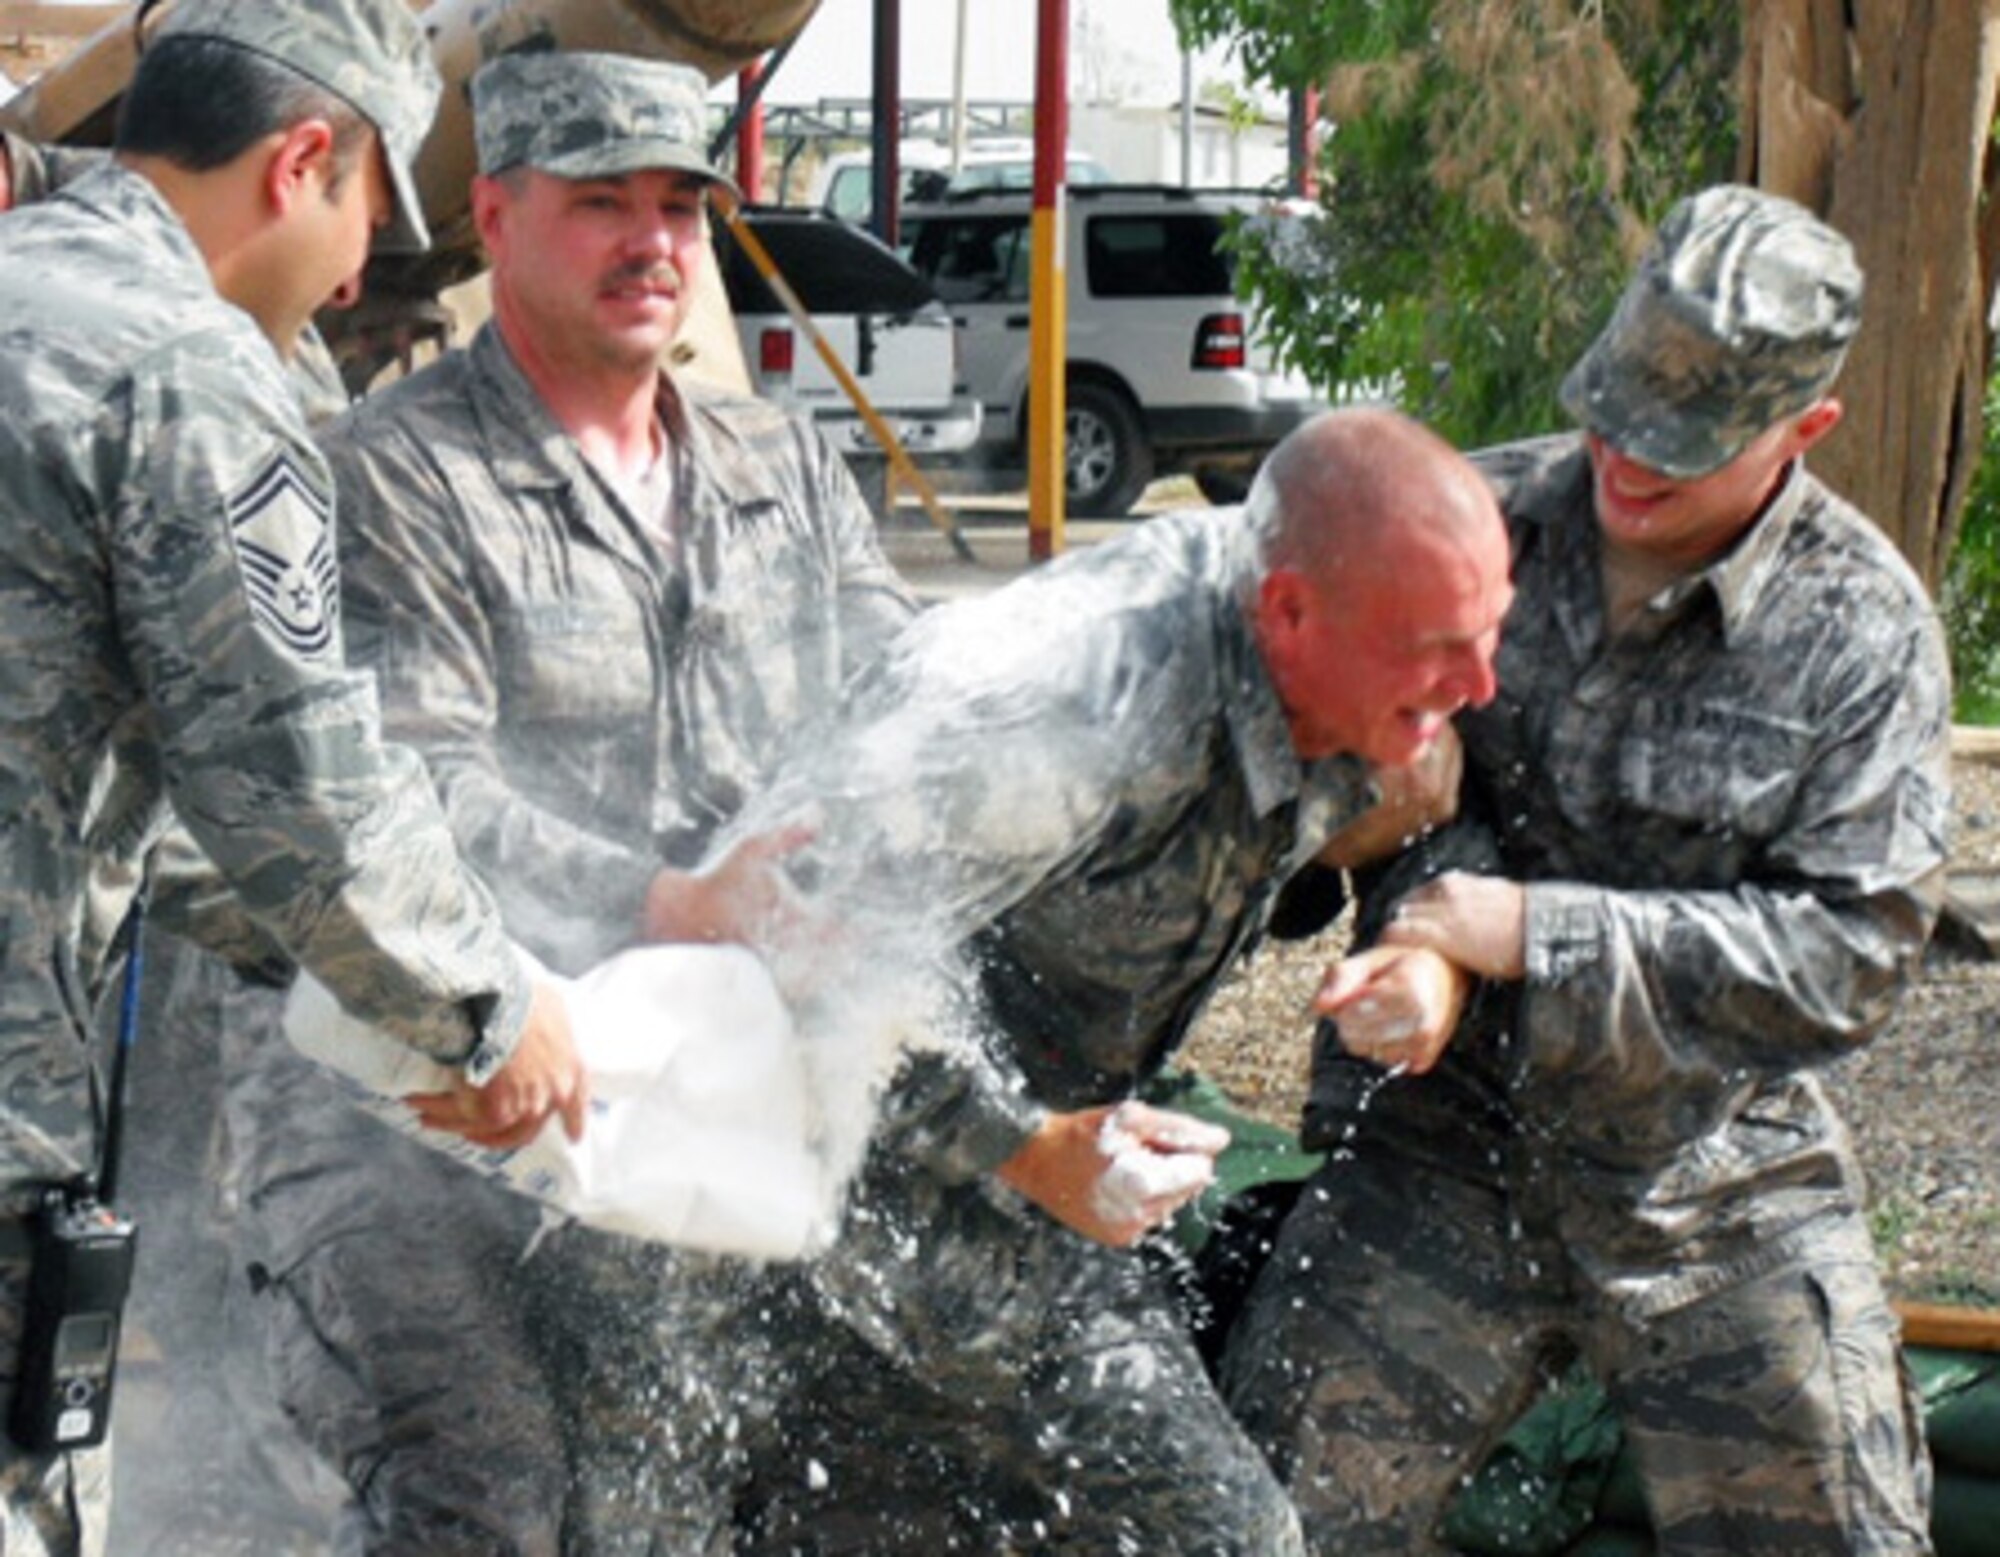 Tech. Sgt. Ted Fussell, 506th Expeditionary Civil Engineer Squadron structural craftsman, gets doused with flour and water during a surprise promotion ceremony for him at Kirkuk Regional Air Base, Iraq, May 21, 2009. Sergeant Fussell is a firefighter with the Anchorage, Alaska, Fire Department, and recently promoted to senior captain. The act of dousing a firefighter with flour and water is a long-standing tradition within the fire department. Sergeant Fussell is a reservist with Air Force Reserve Command's 477th Fighter Group, an F-22 classic associate unit, at Elmendorf Air Force Base, Alaska. (Courtesy photo)